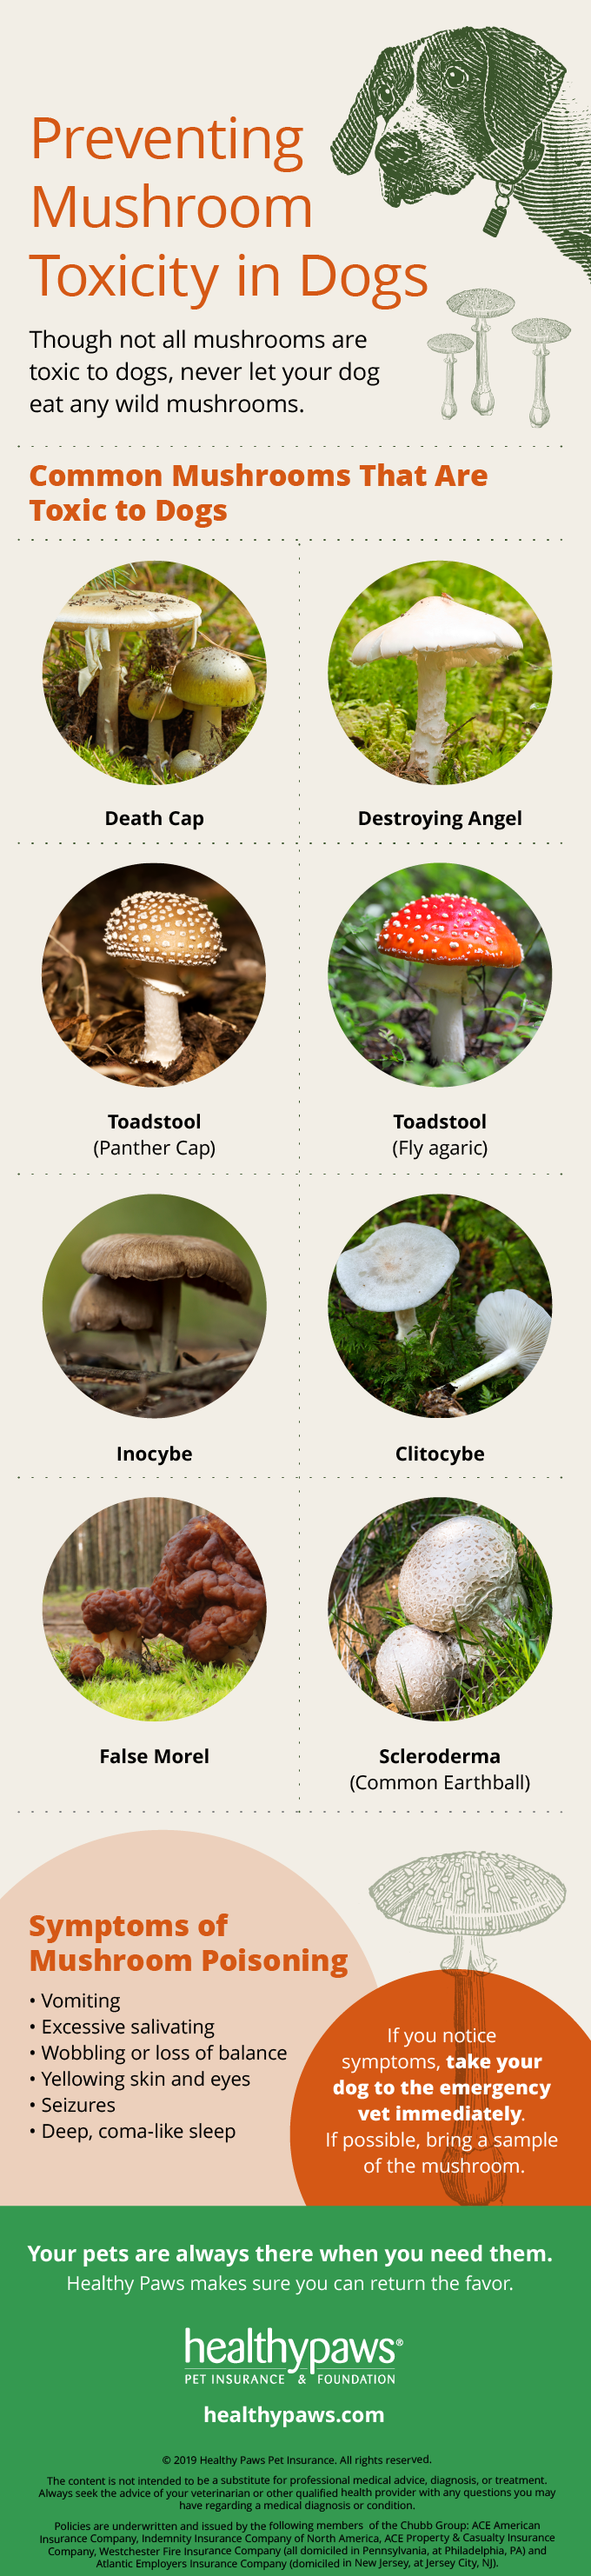 Healthy Paws infographic about preventing mushroom toxicity in dogs